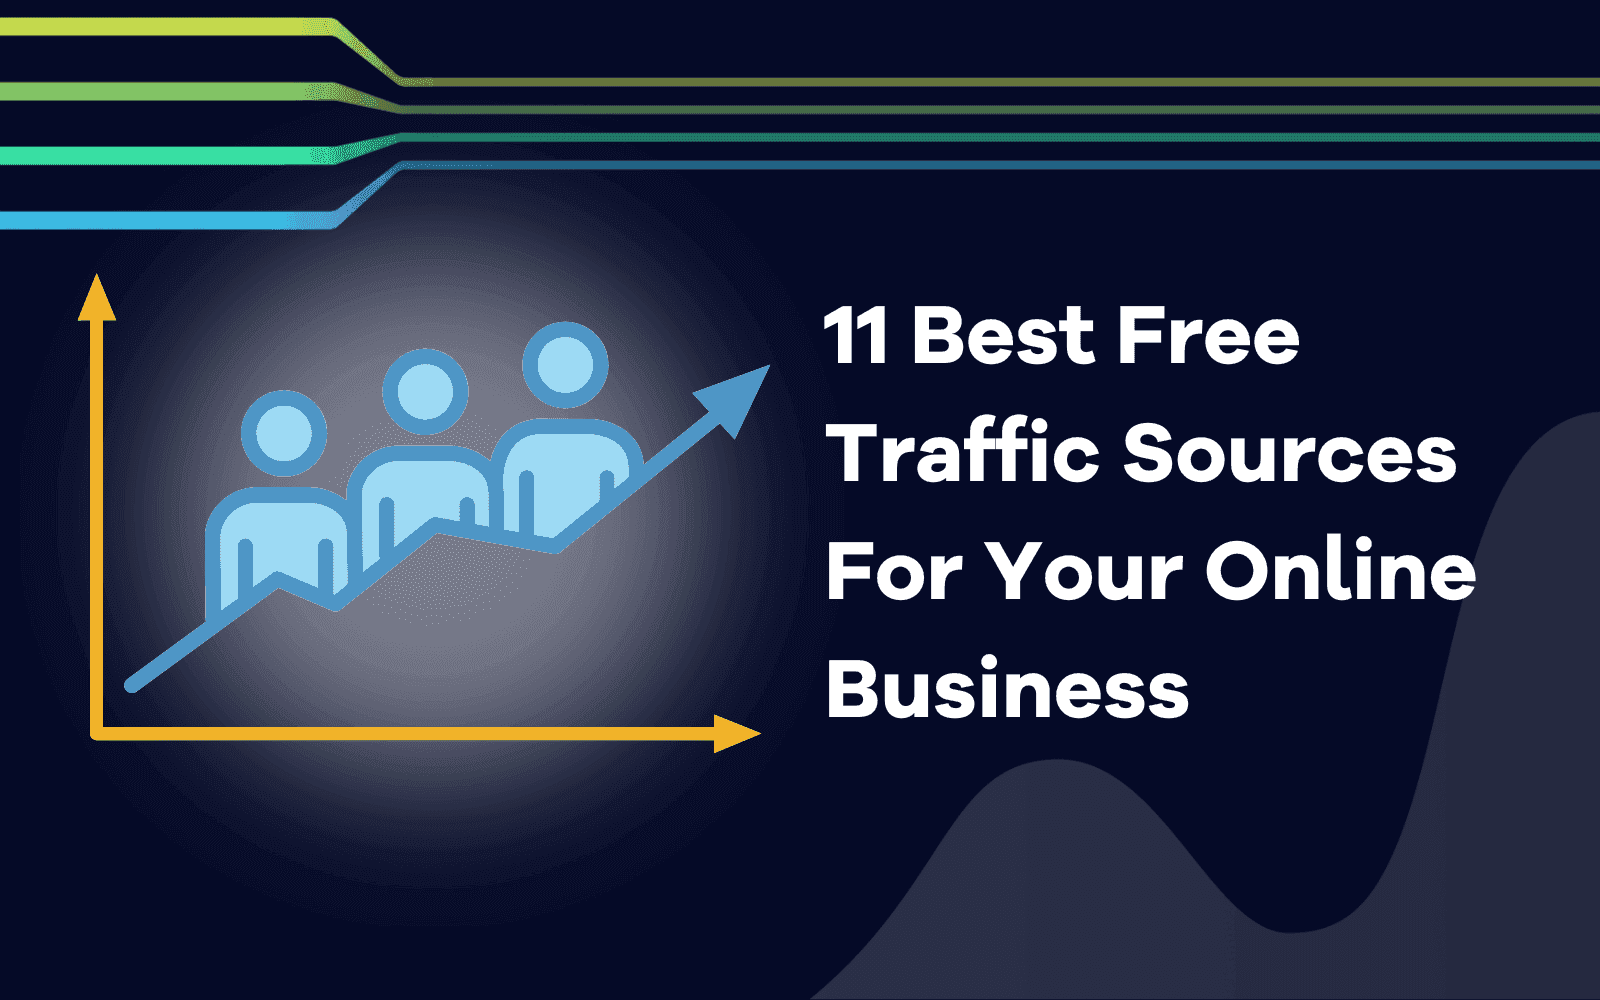 Best Free Traffic Sources For Your Online Business